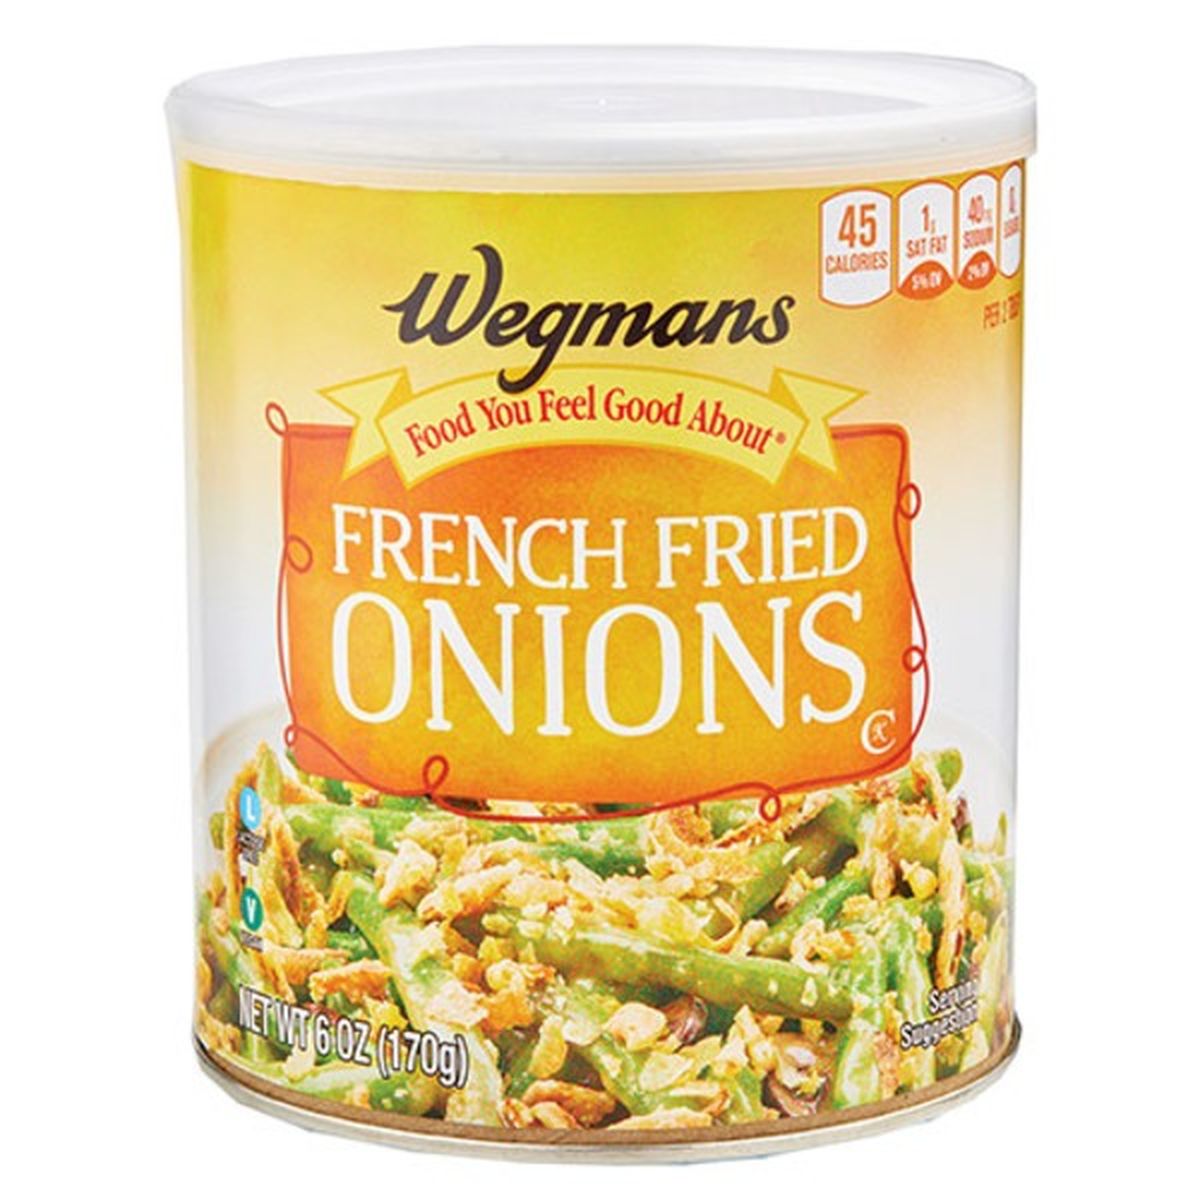 Calories in Wegmans French Fried Onions